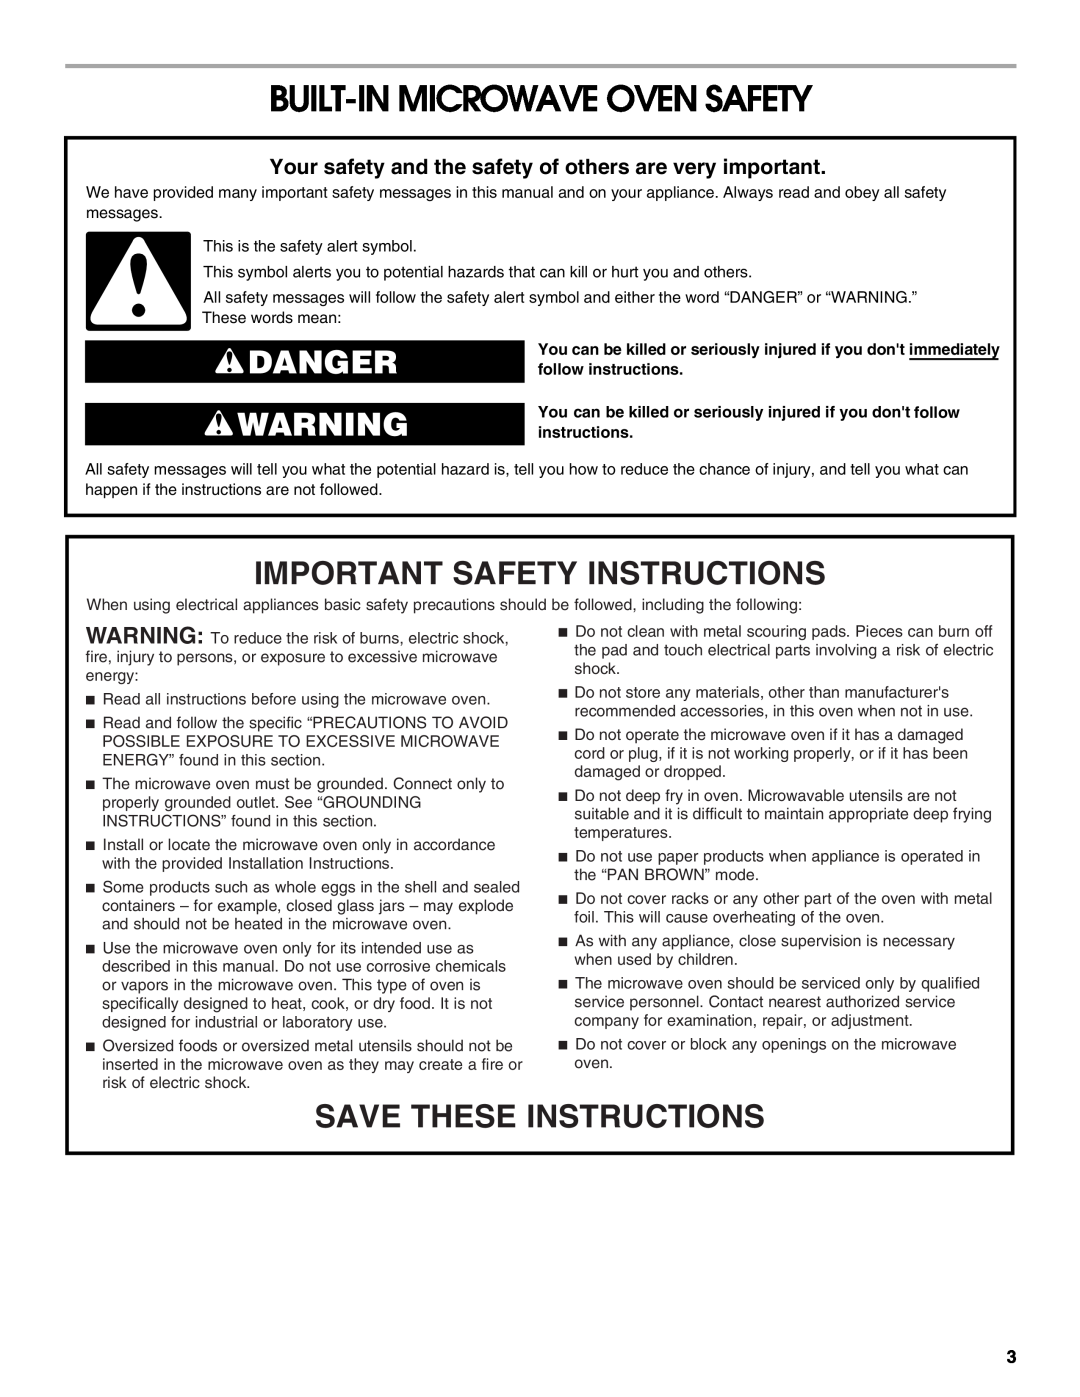 Jenn-Air JMW2430, JMW2327 Built-Inmicrowave Oven Safety, Danger, Important Safety Instructions, Save These Instructions 